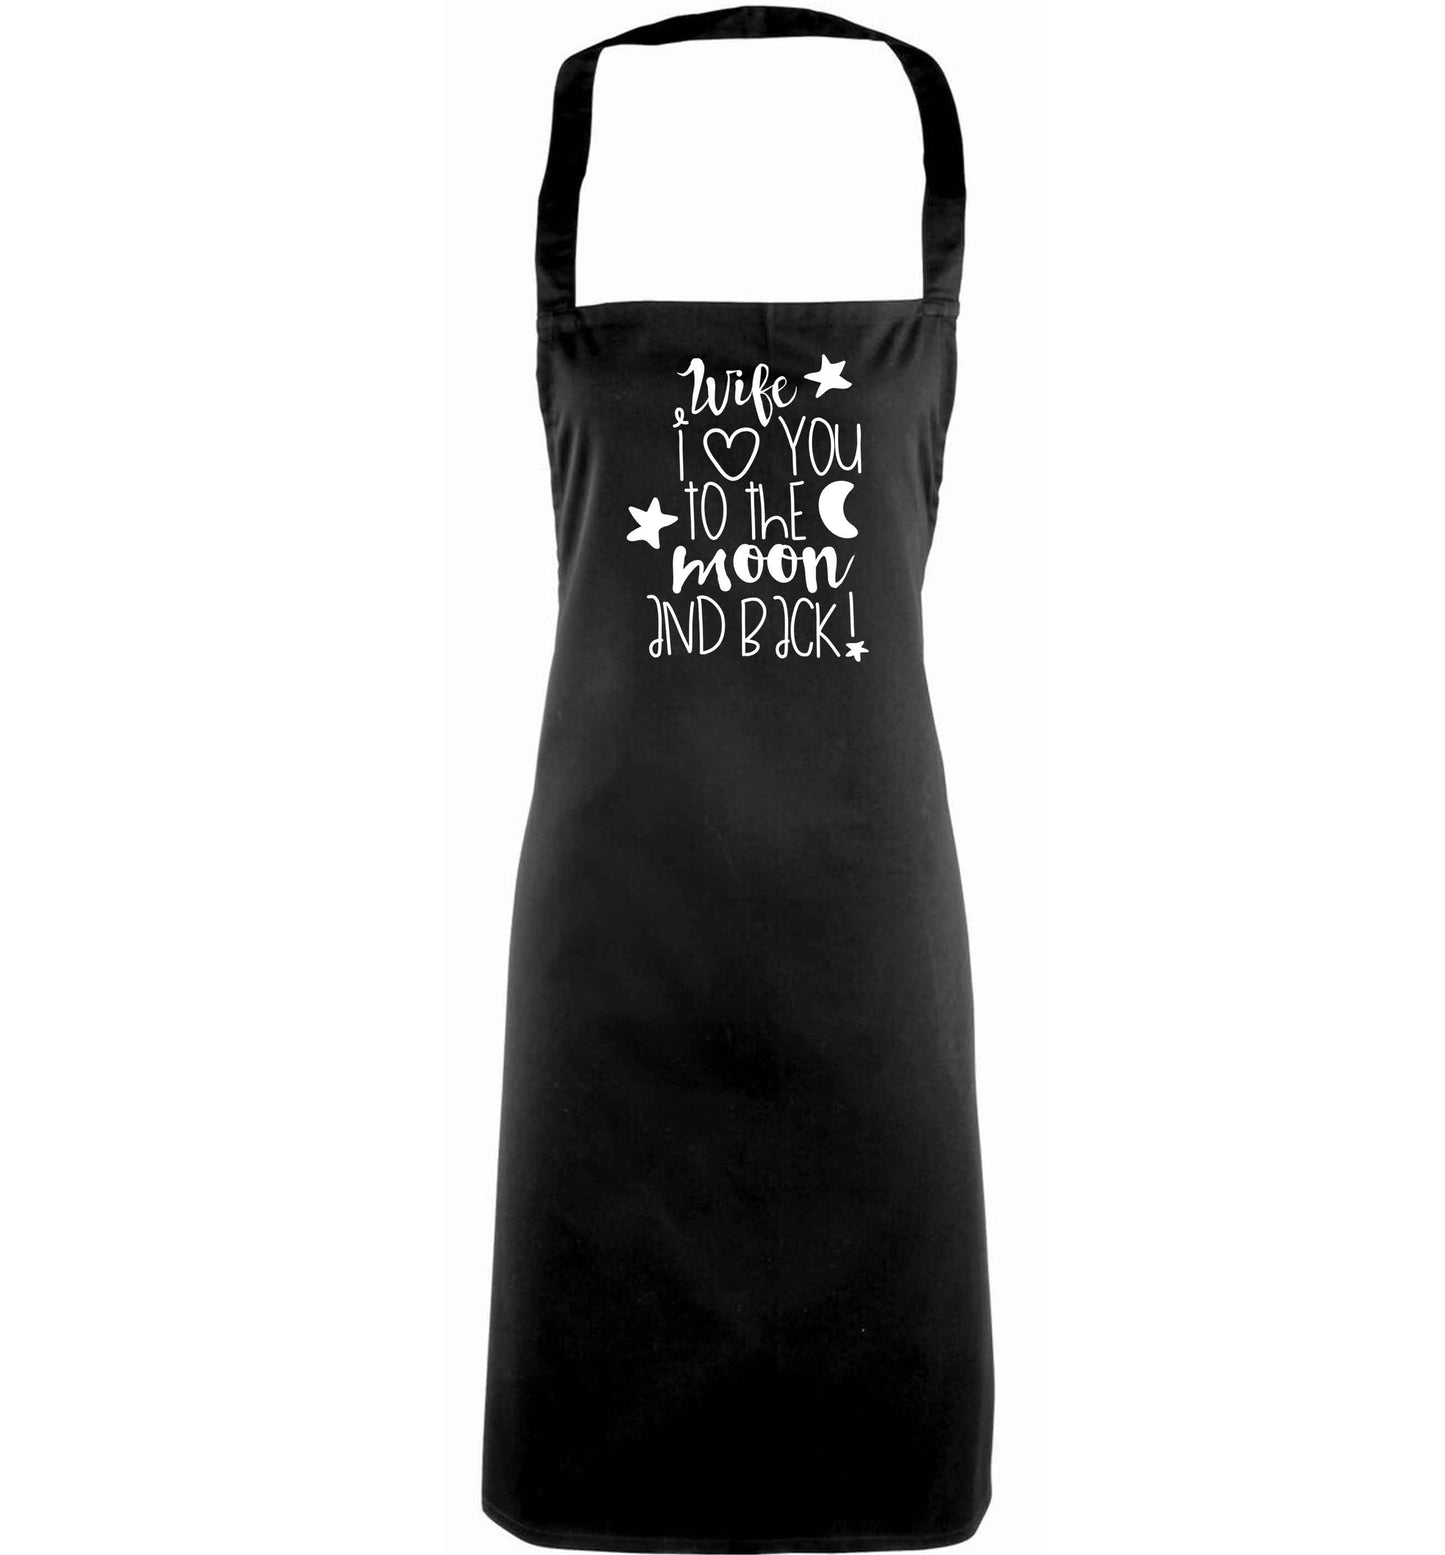 Wife I love you to the moon and back adults black apron